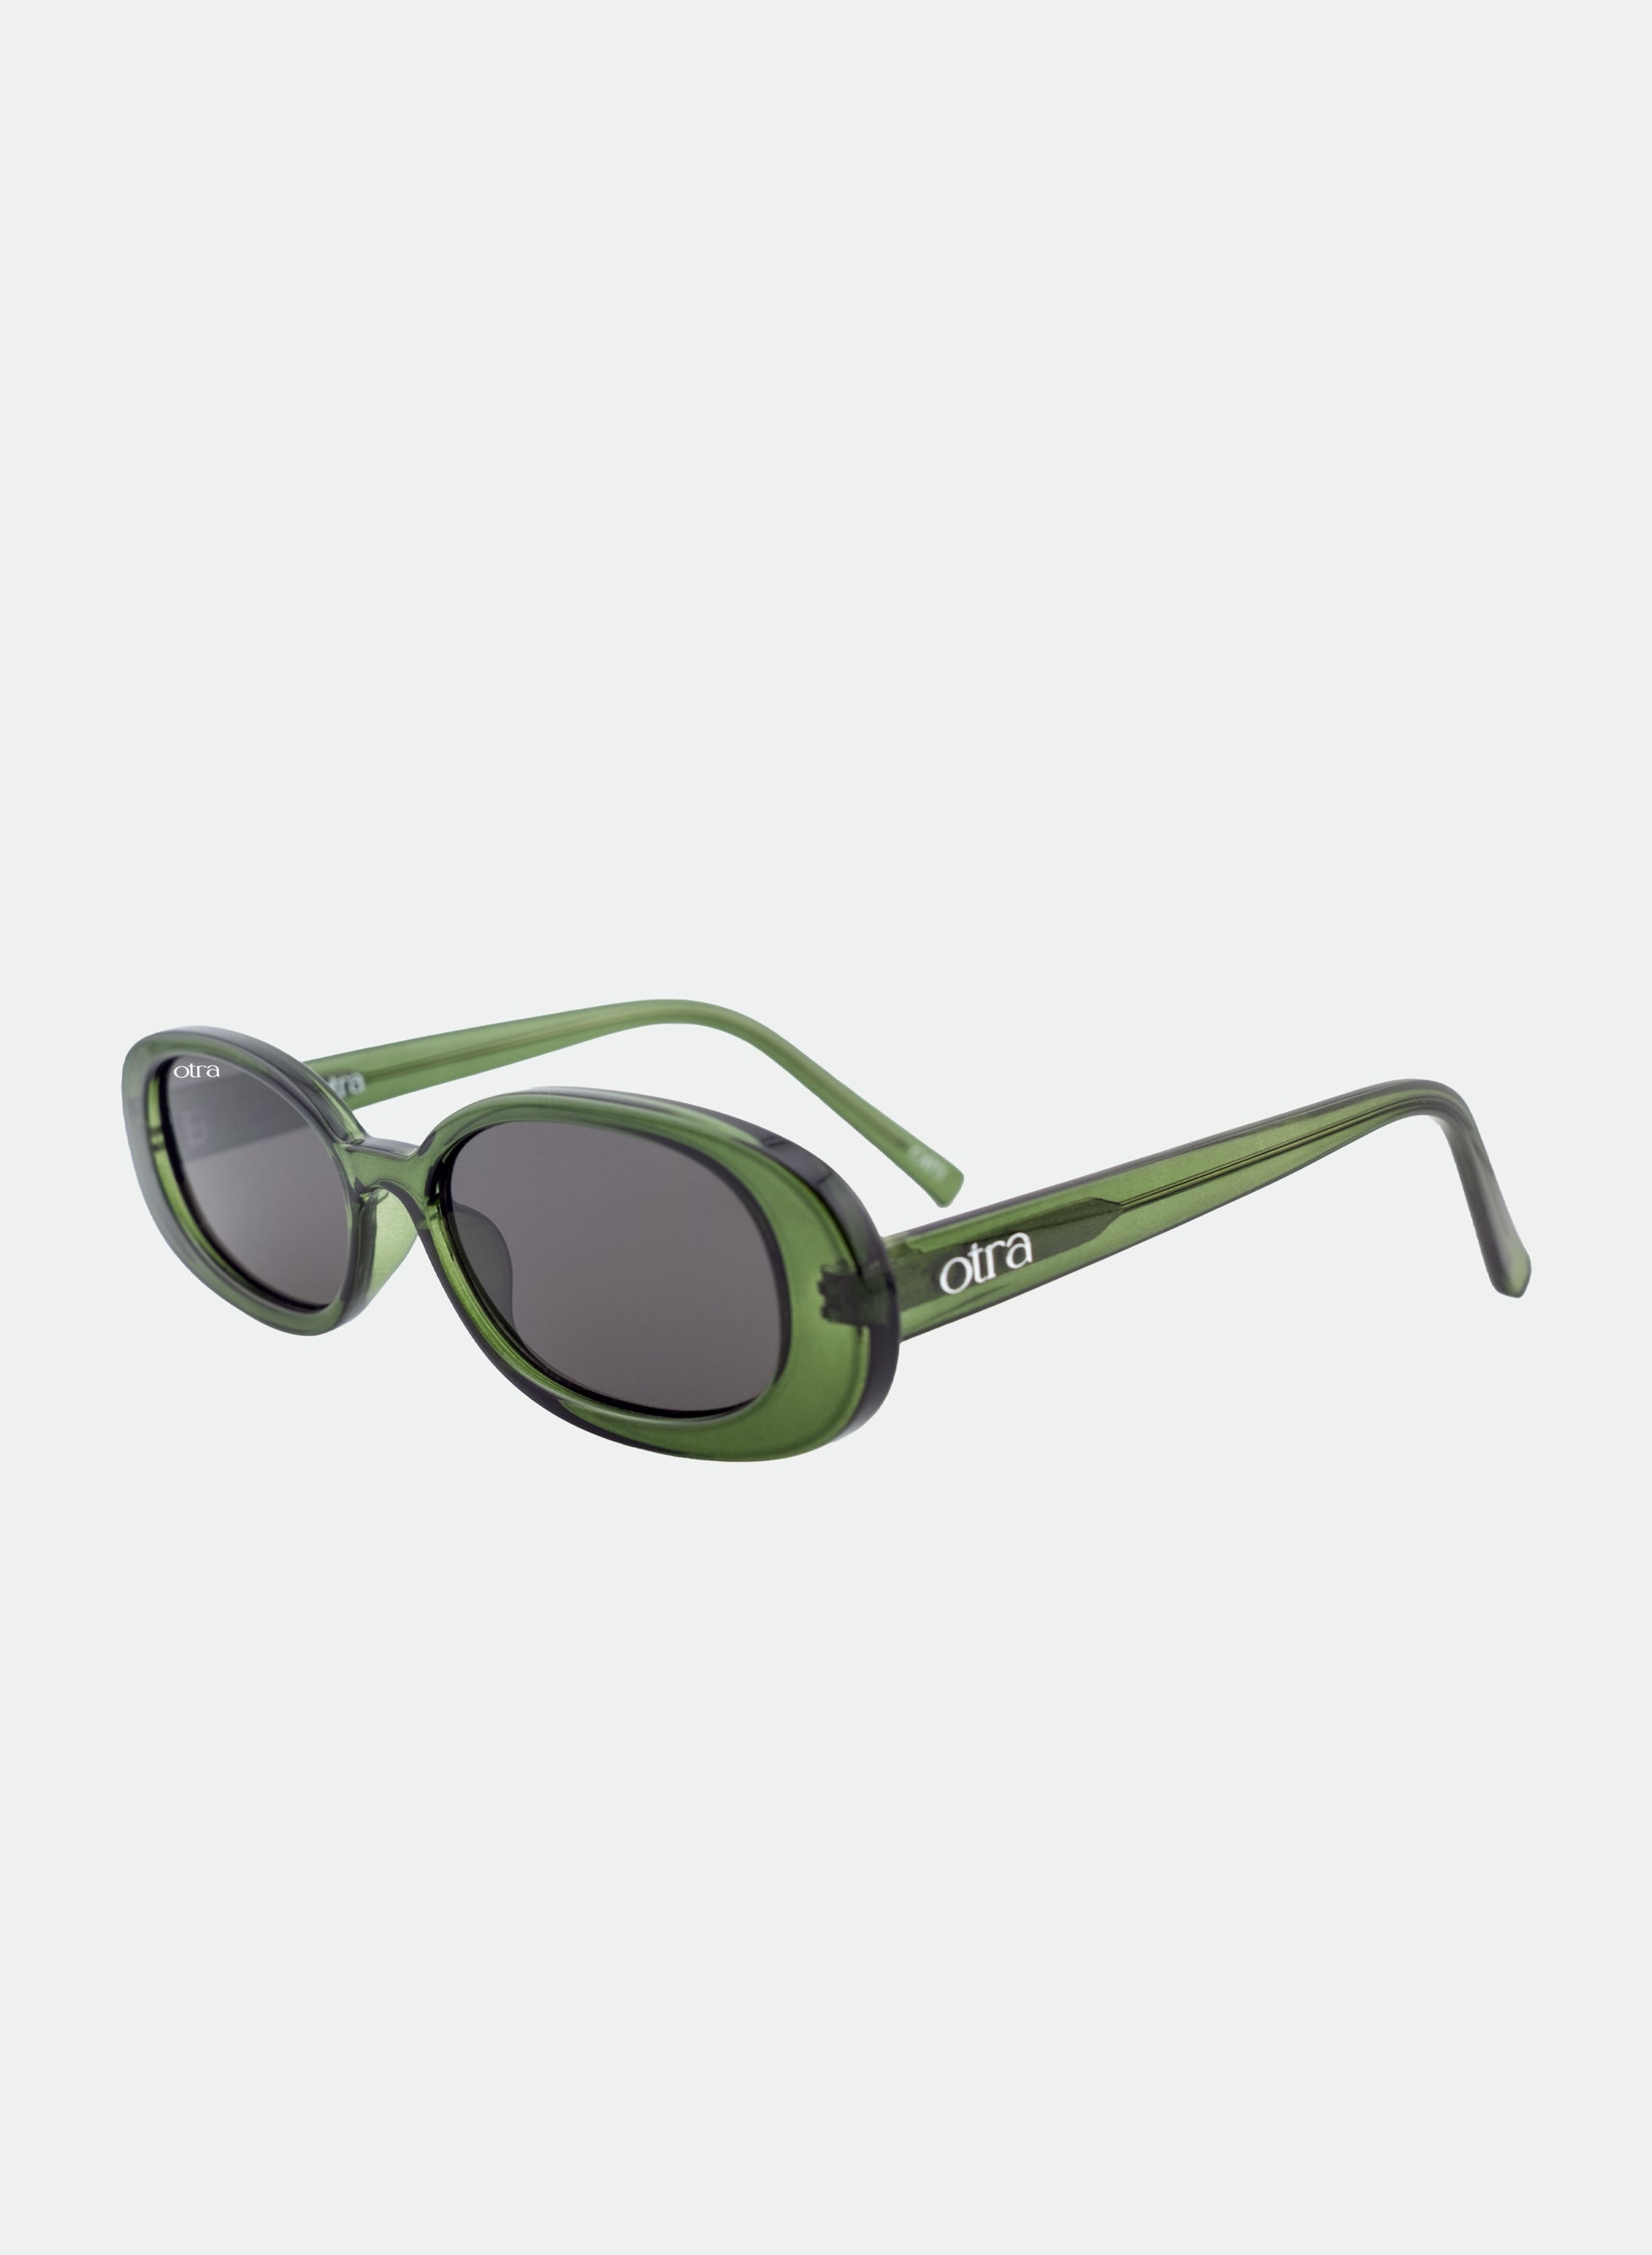 Gina sunglasses in green matcha side view